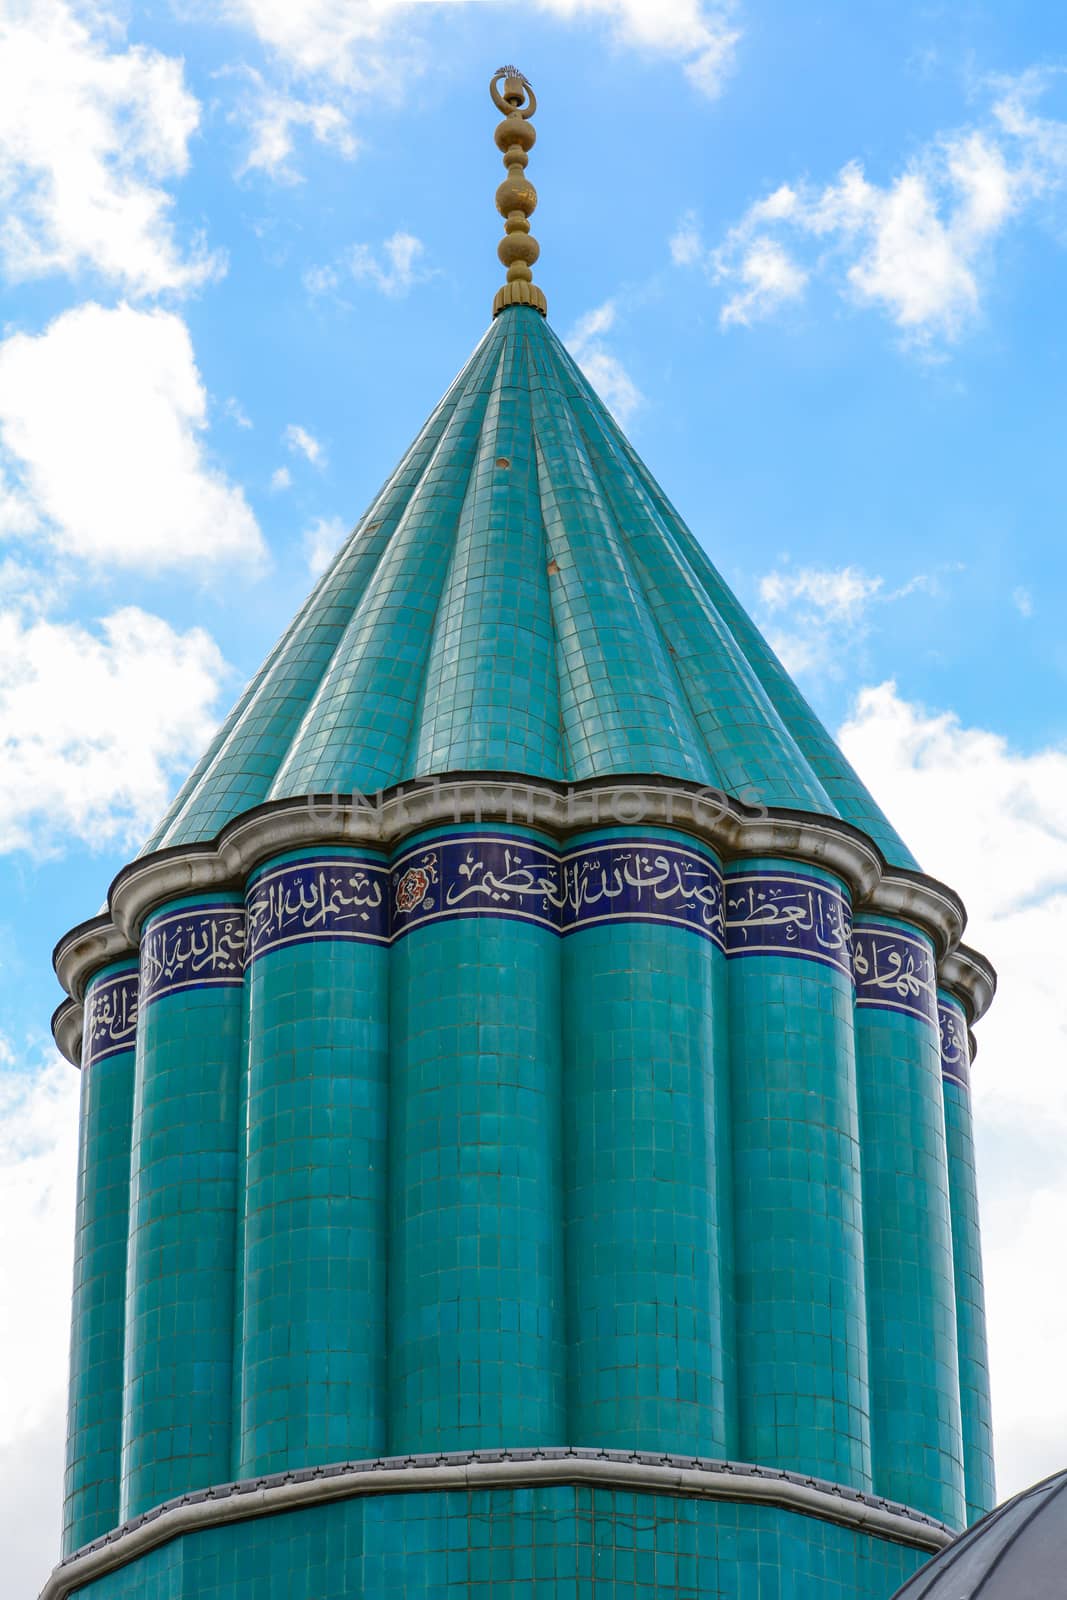 Mevlana Mosque Dome turquoise color by crazymedia007